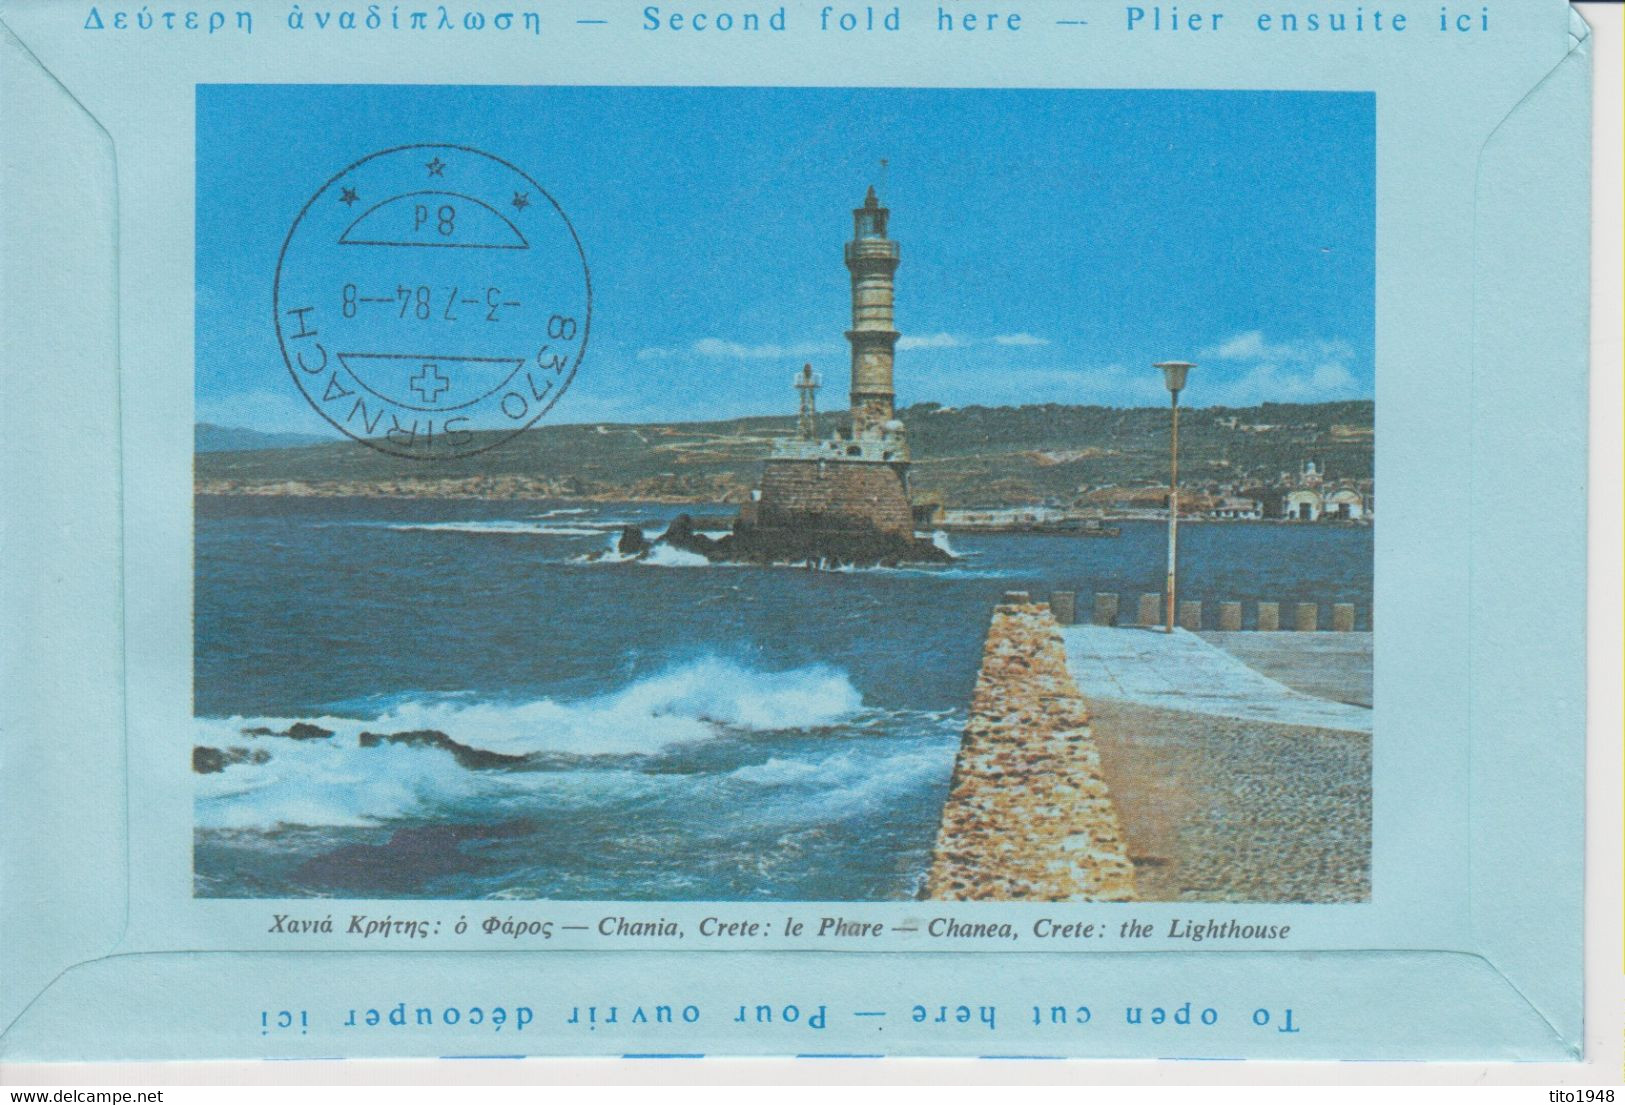 Hellas, 1984, Frama, Lettercard,  To Switzerland, See Scans! - Storia Postale